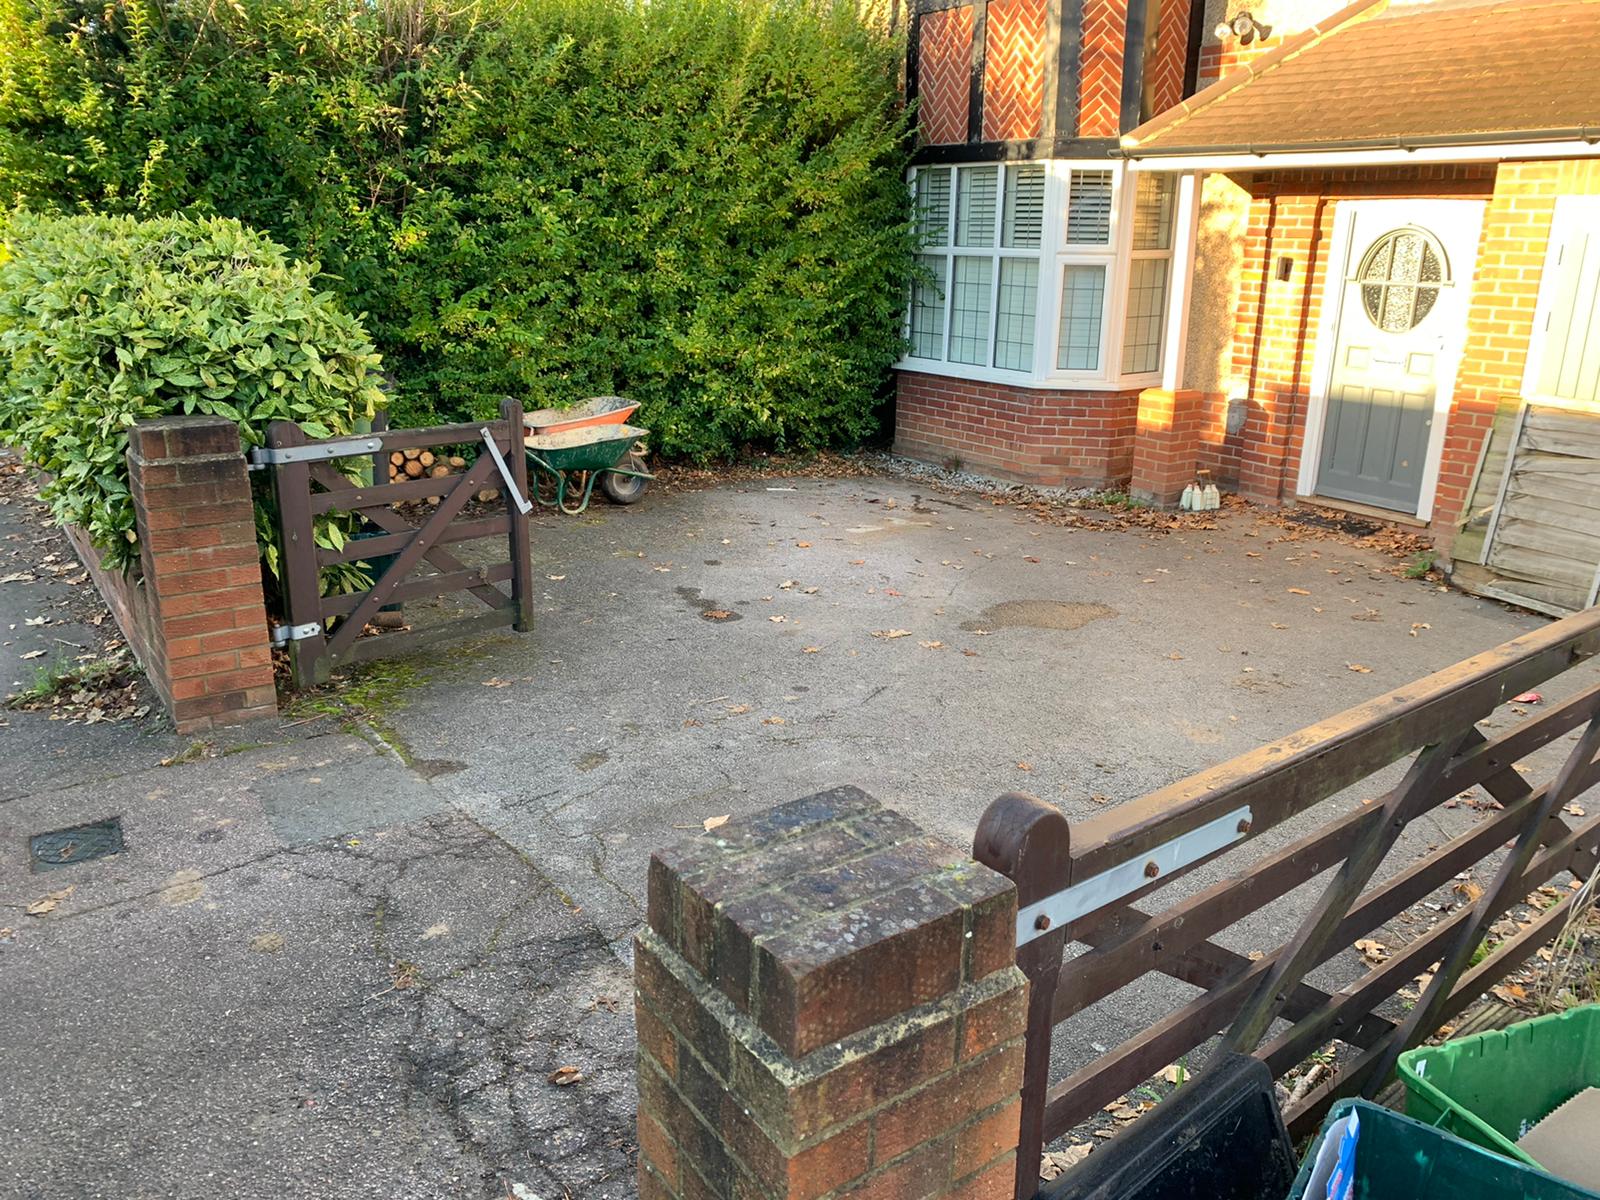 driveway and hedge to be replaced